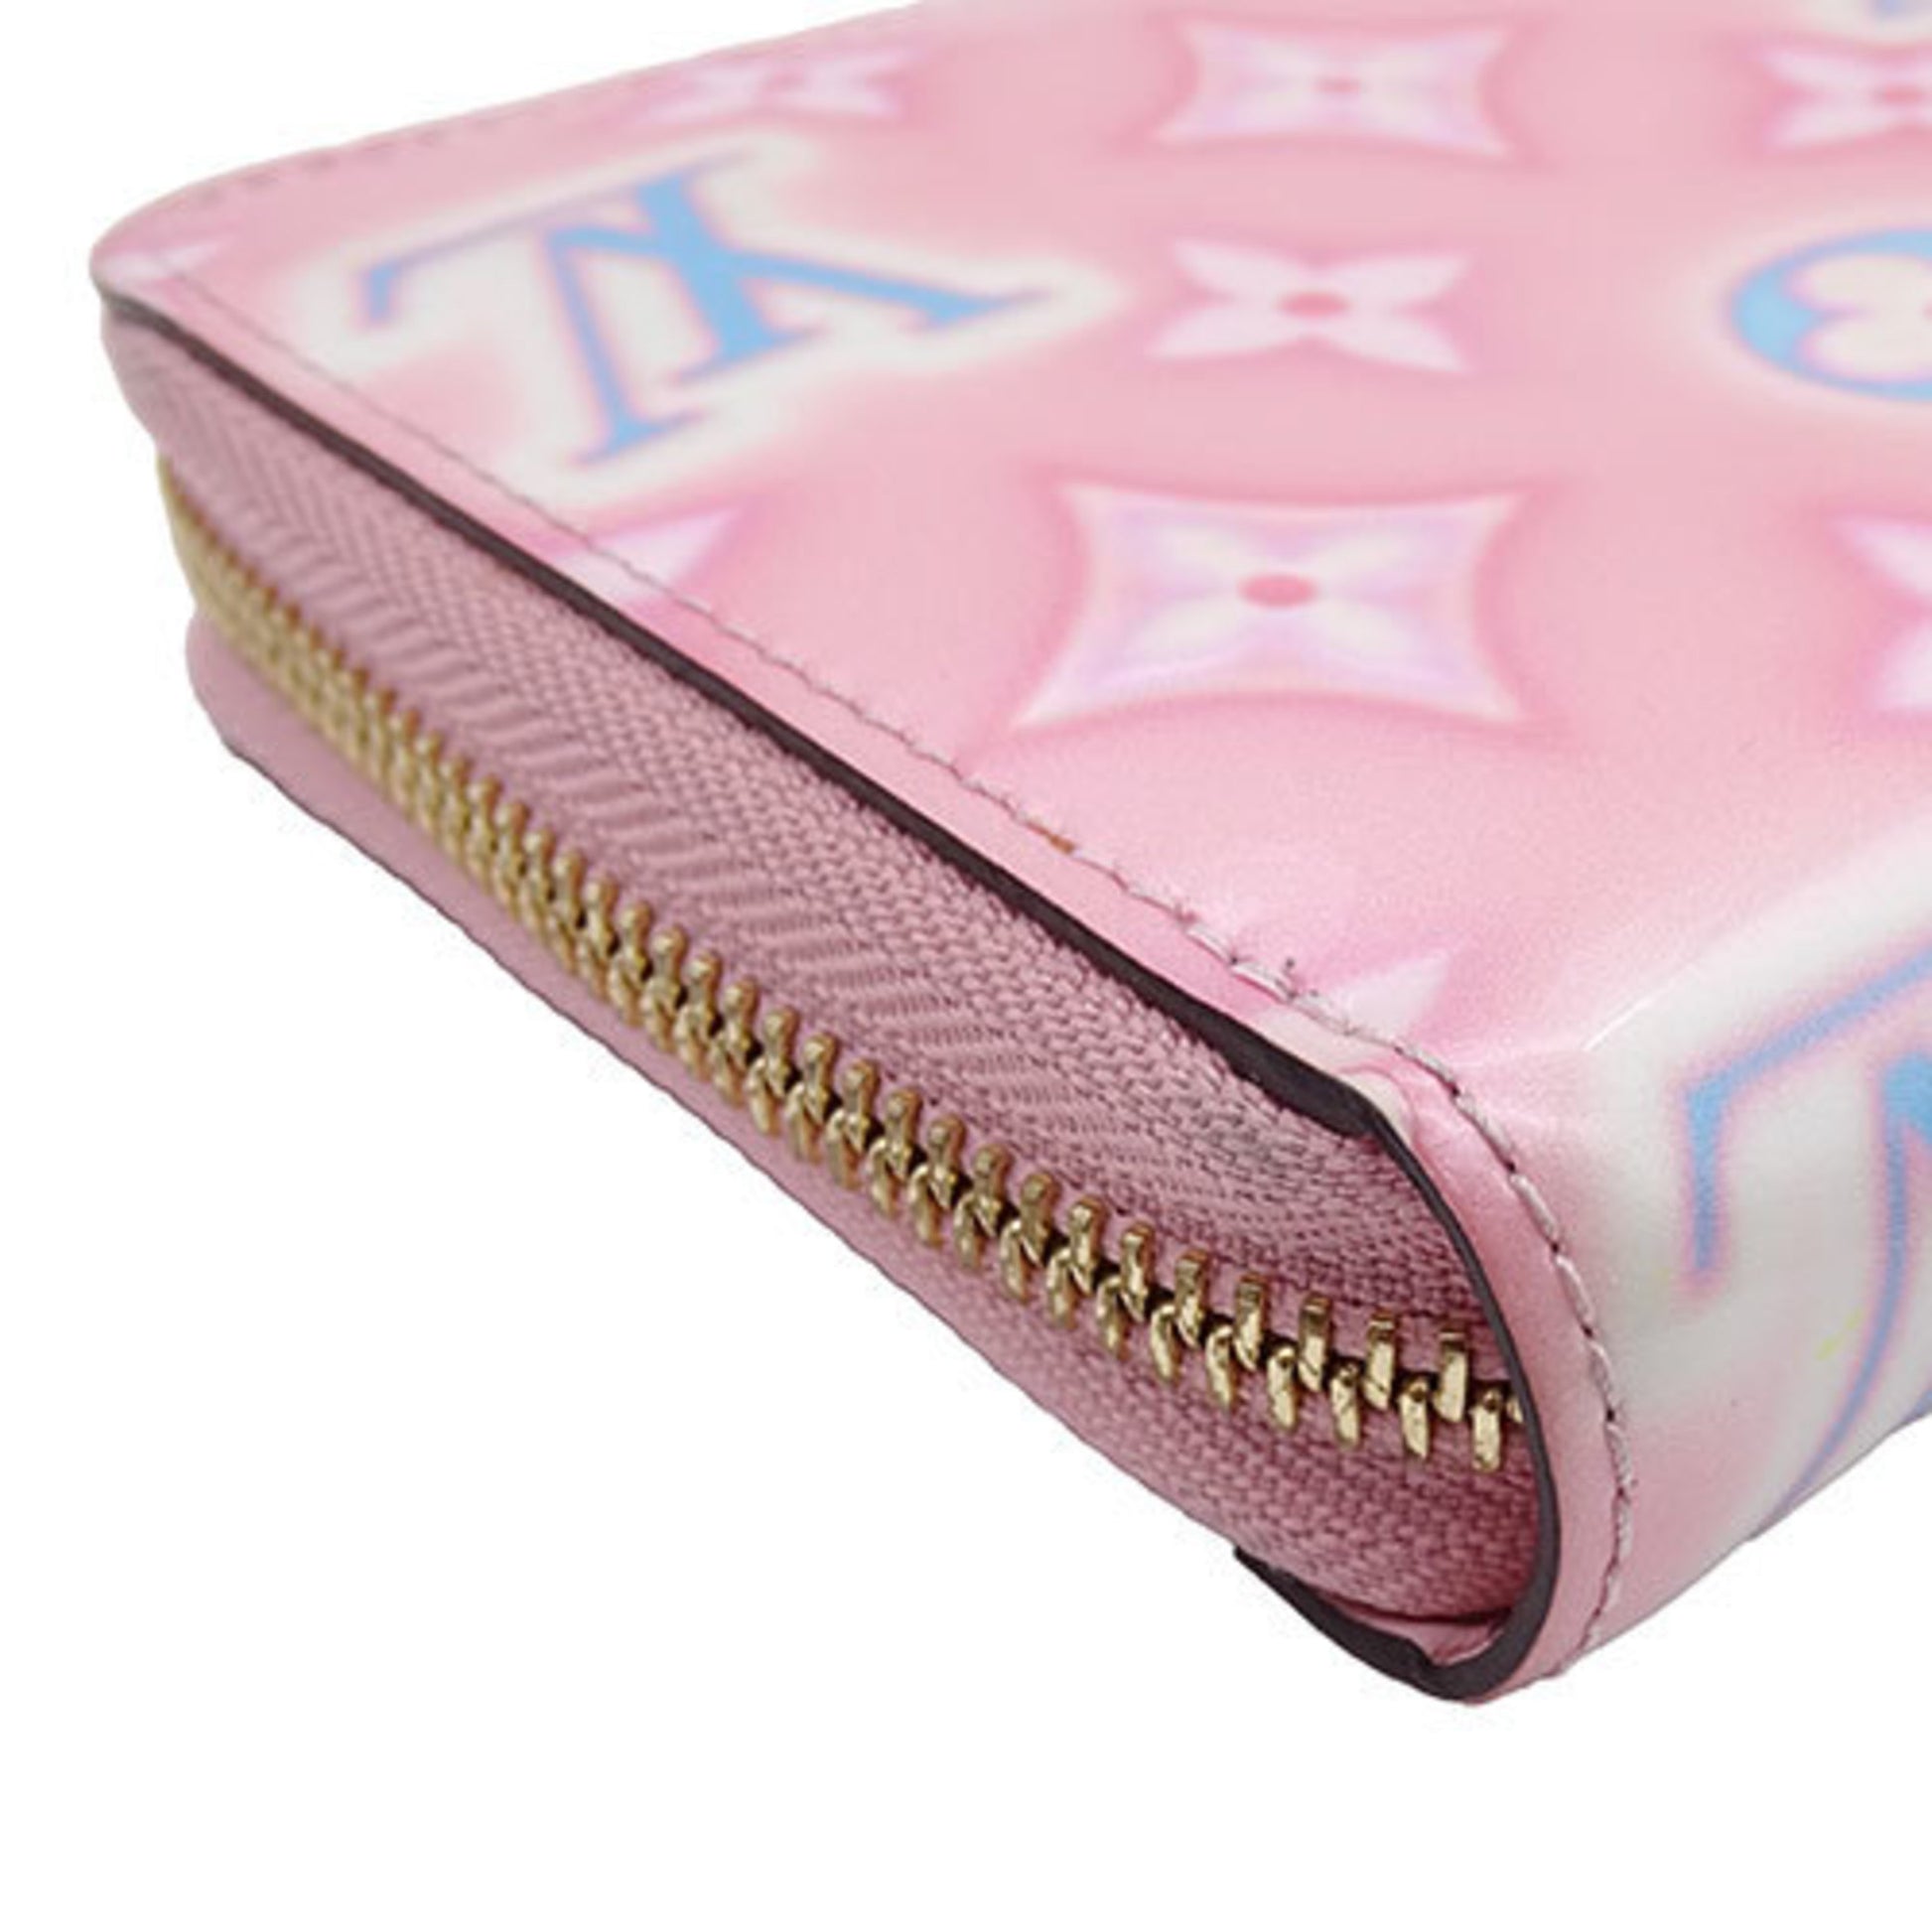 Louis Vuitton M82144 LV Vertical Compact Wallet , Pink, One Size